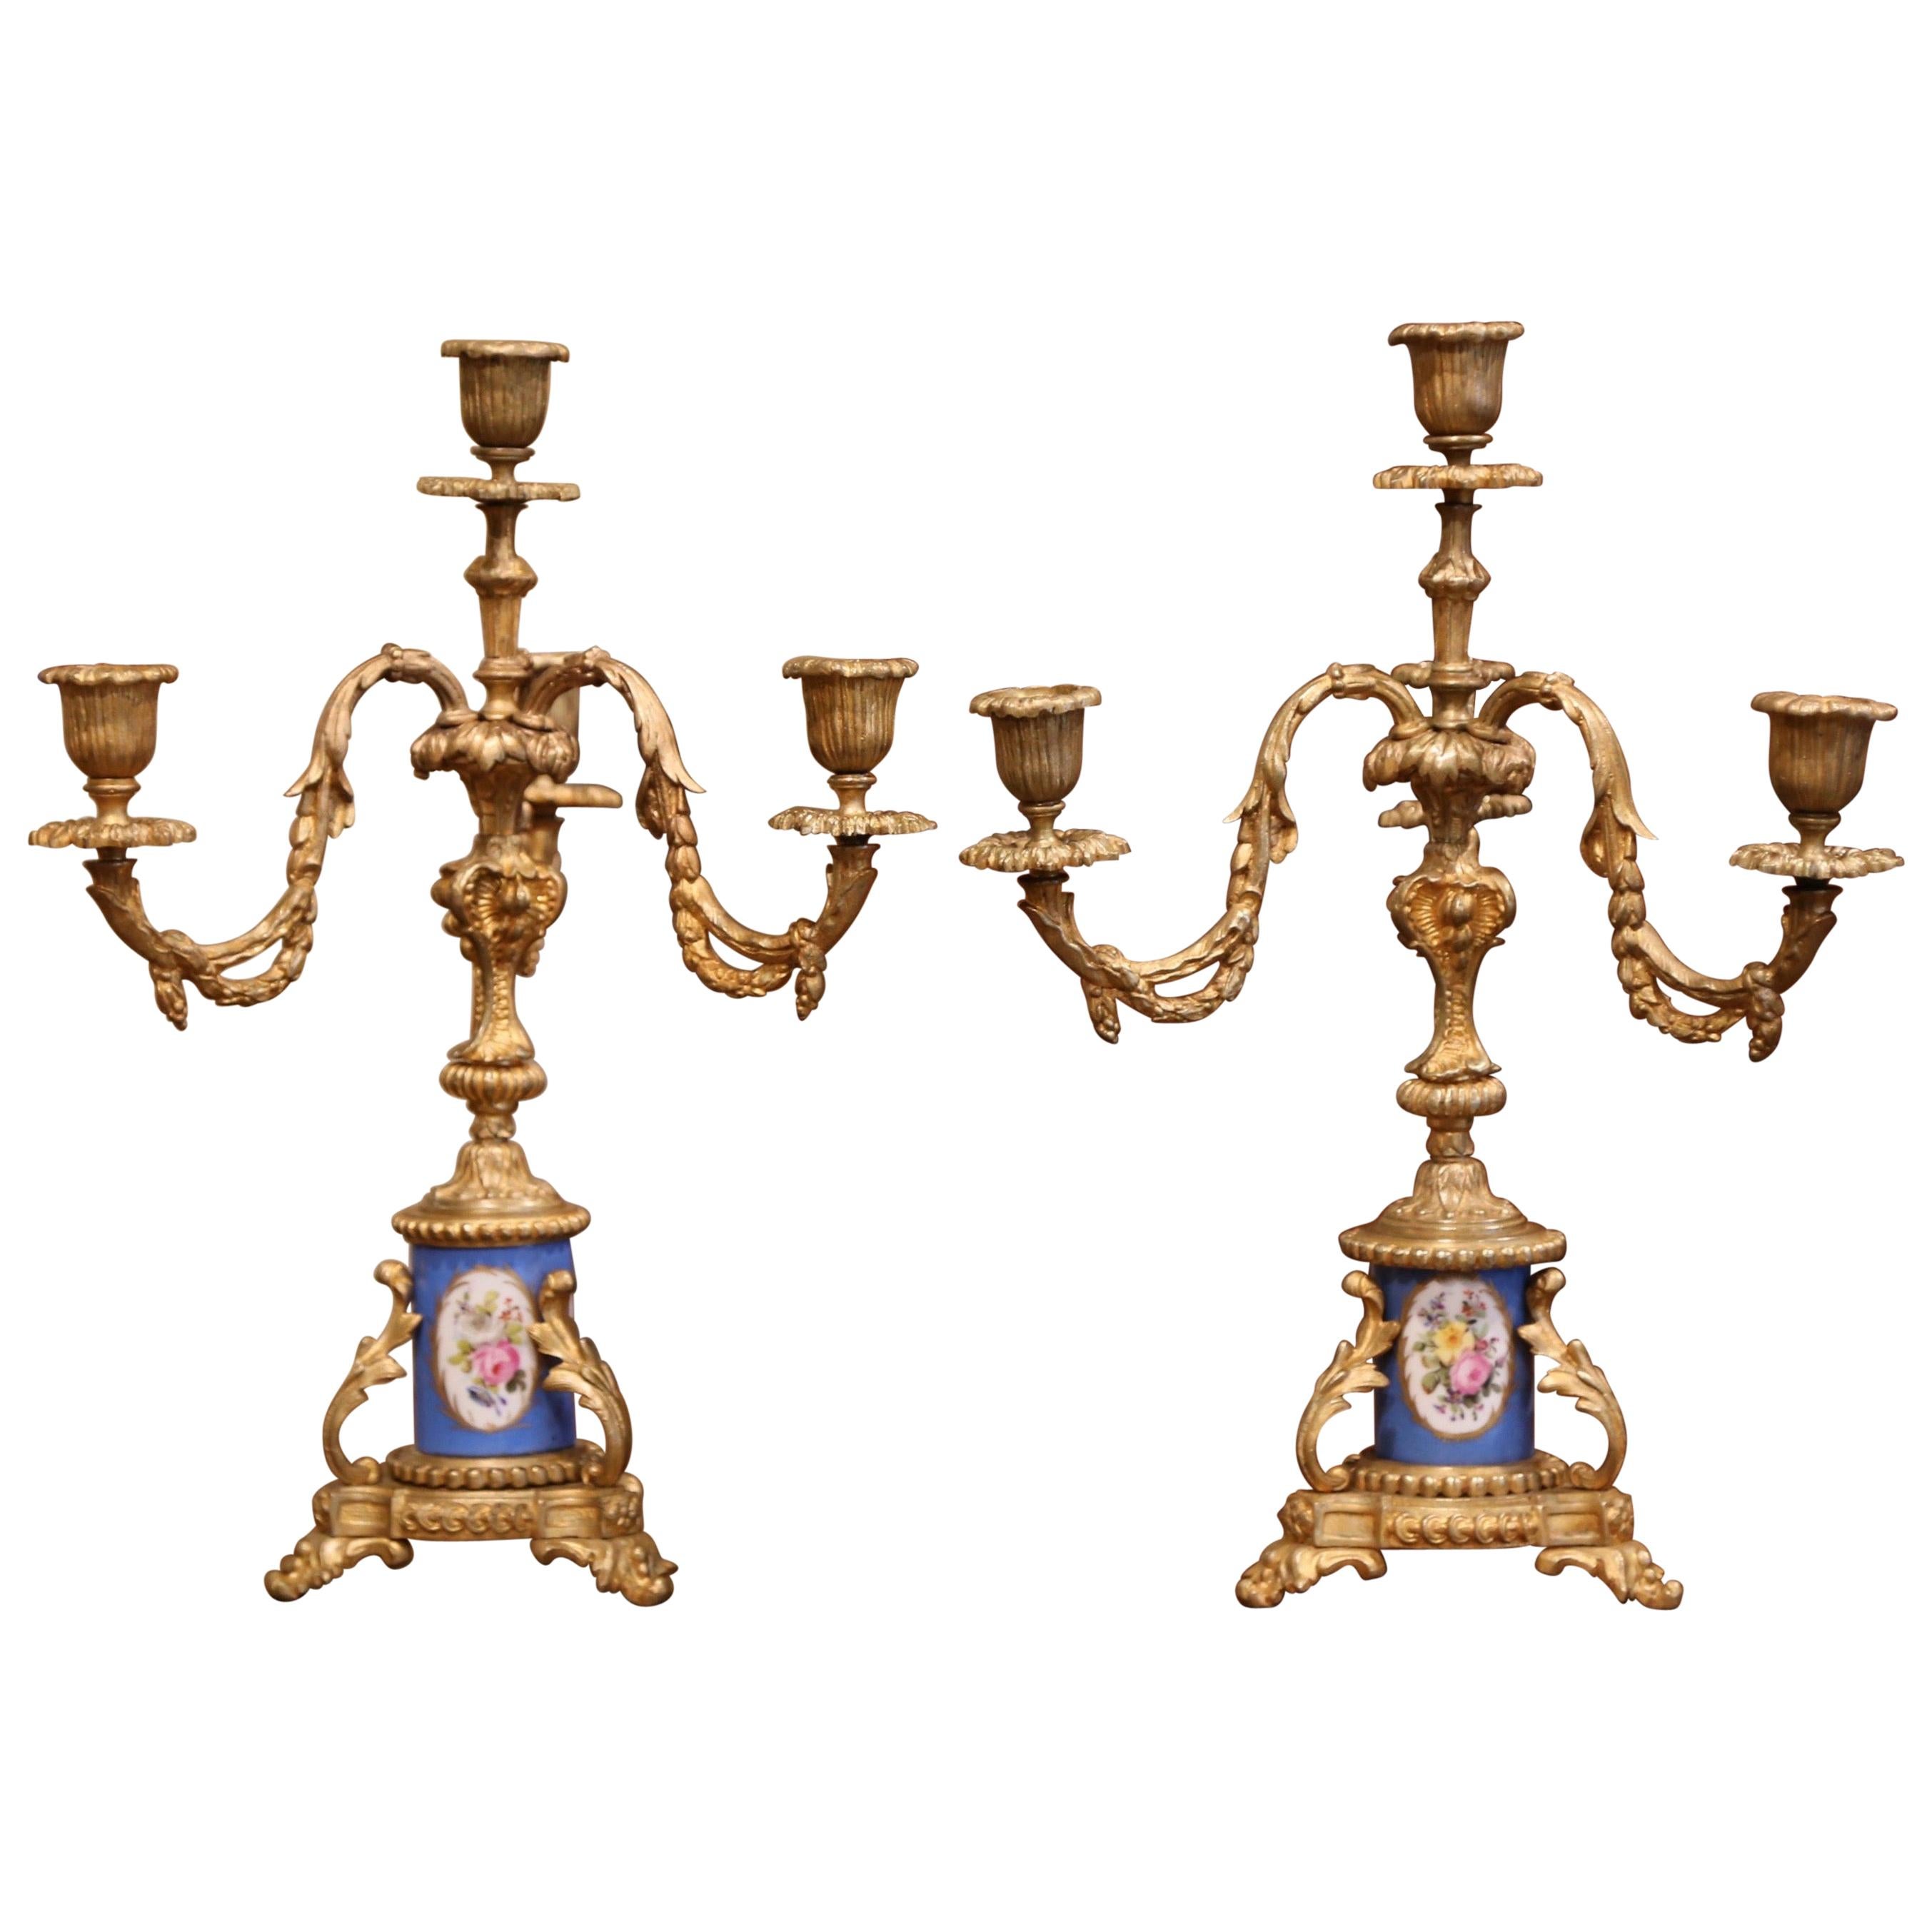 Pair of 19th Century French Louis XVI Bronze Dore and Porcelain Candelabras